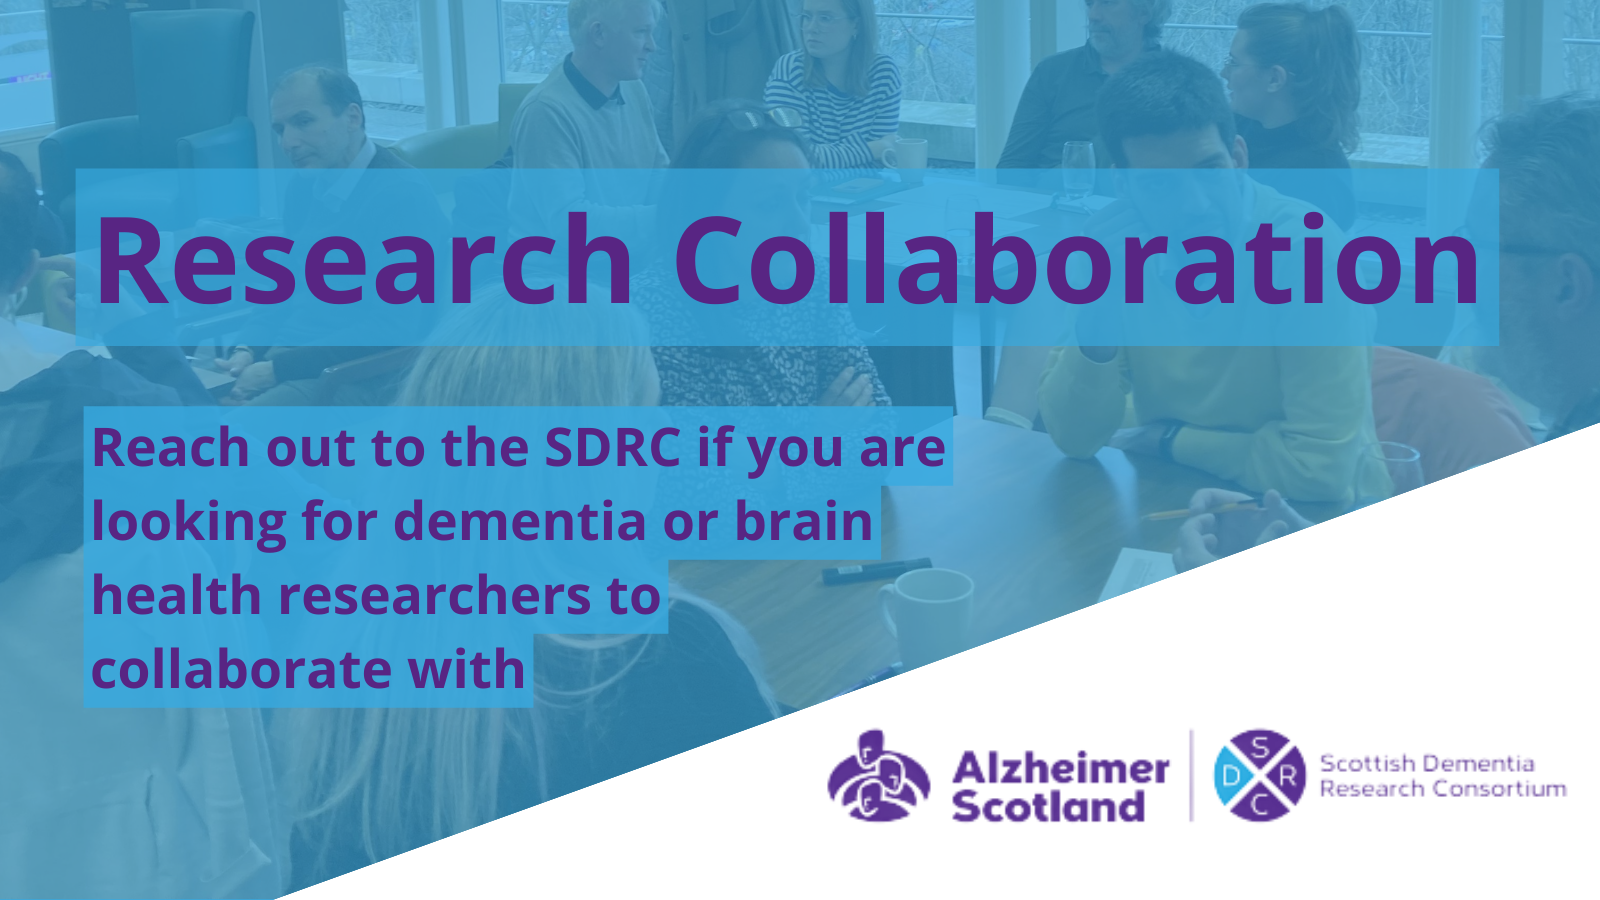 Collaborate with SDRC members